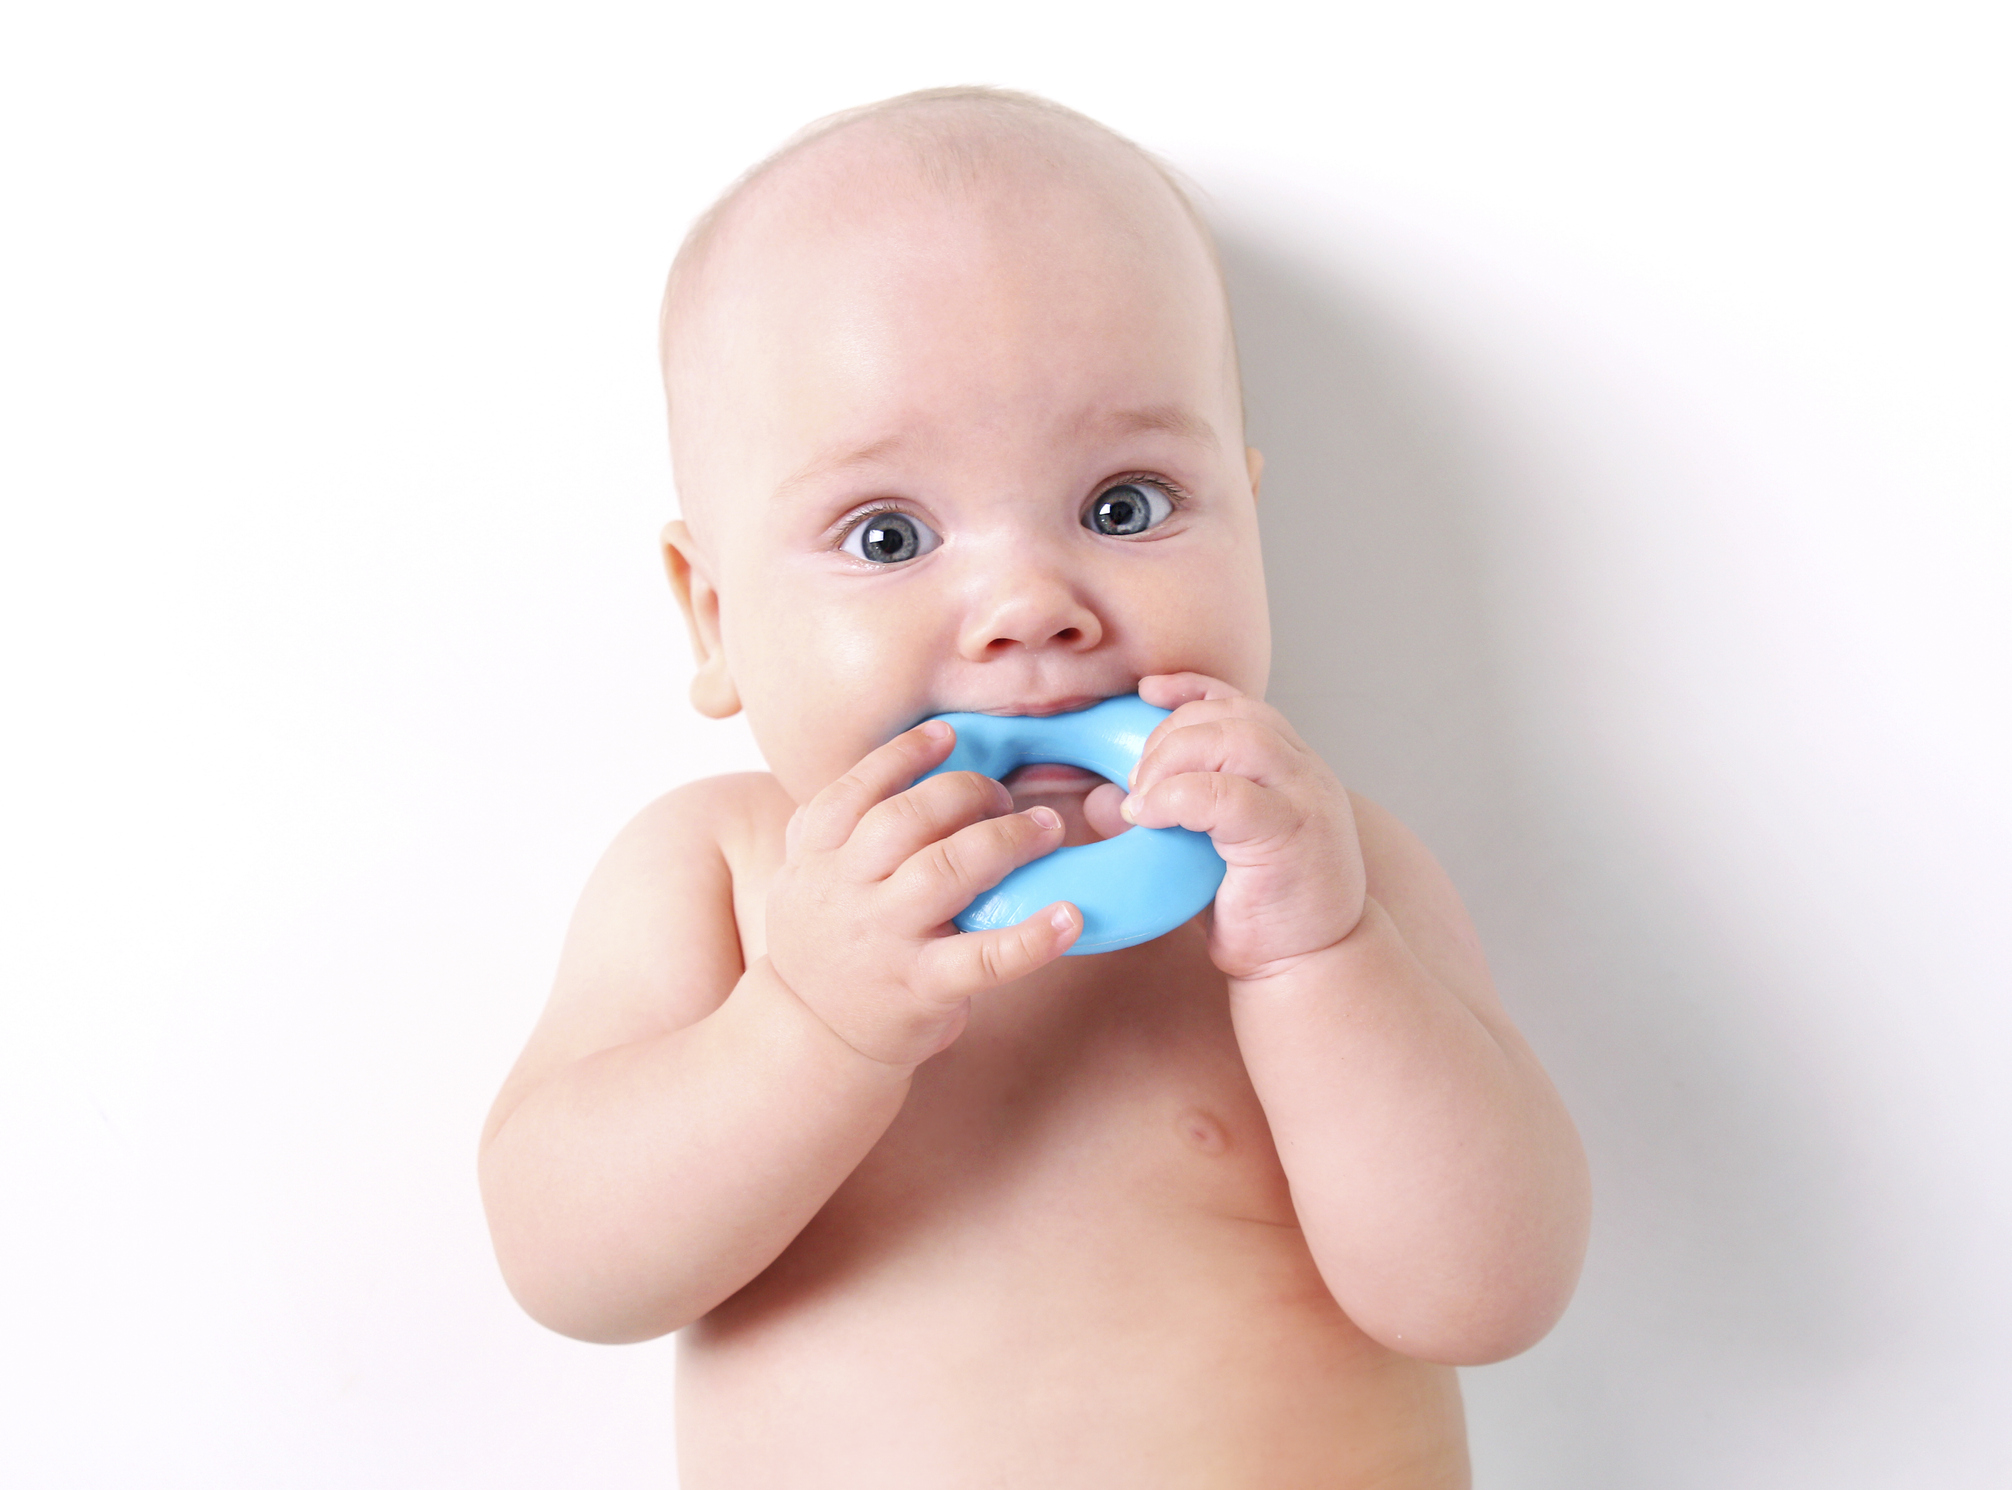 A baby lays on a white sheet chewing on a teething ring